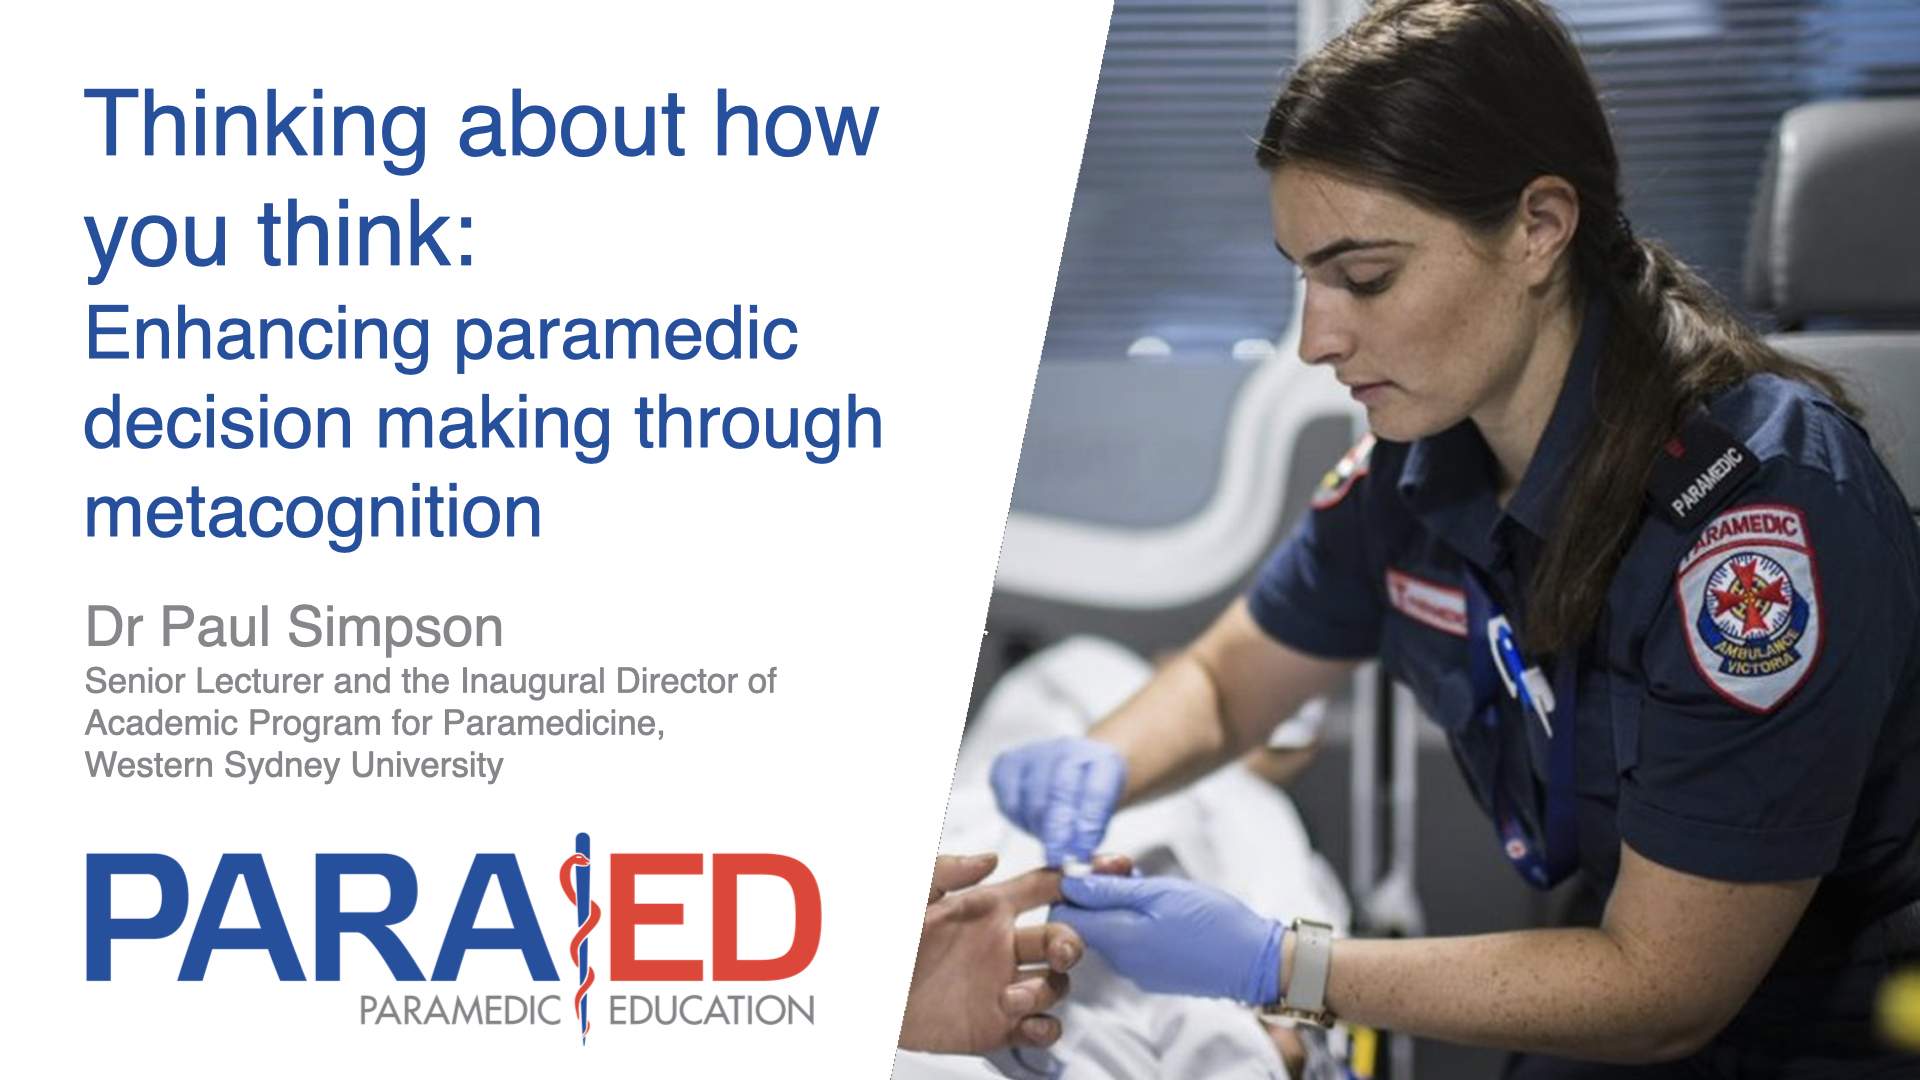 Thinking about how you think: Enhancing paramedic decision making through metacognition